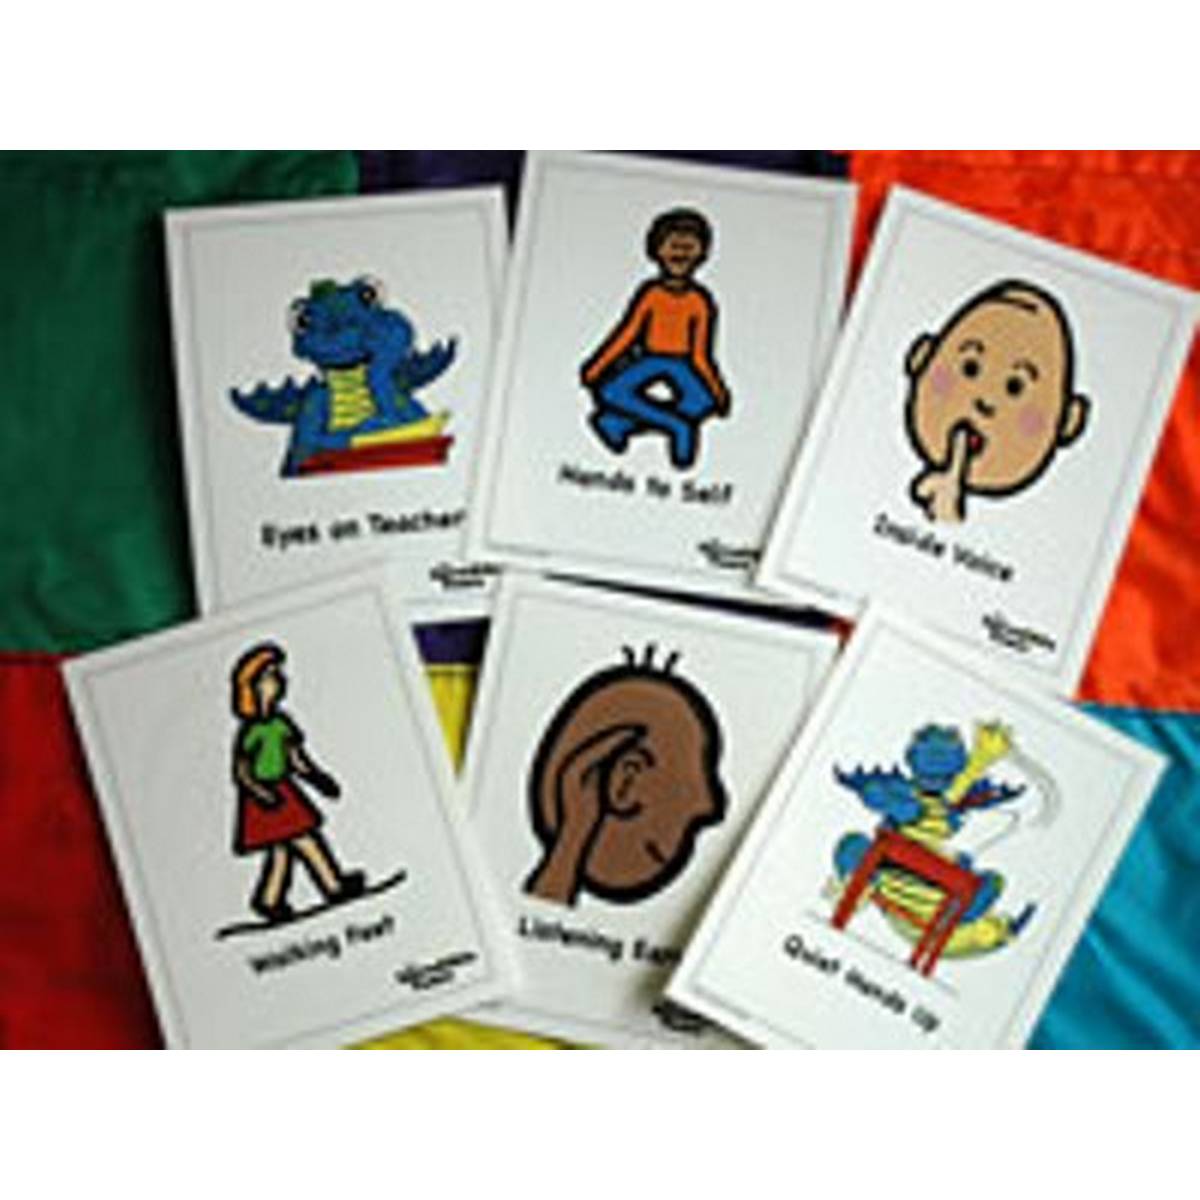 Incredible Years - School Rules A4 Cue Cards (Laminated) - Set of 7